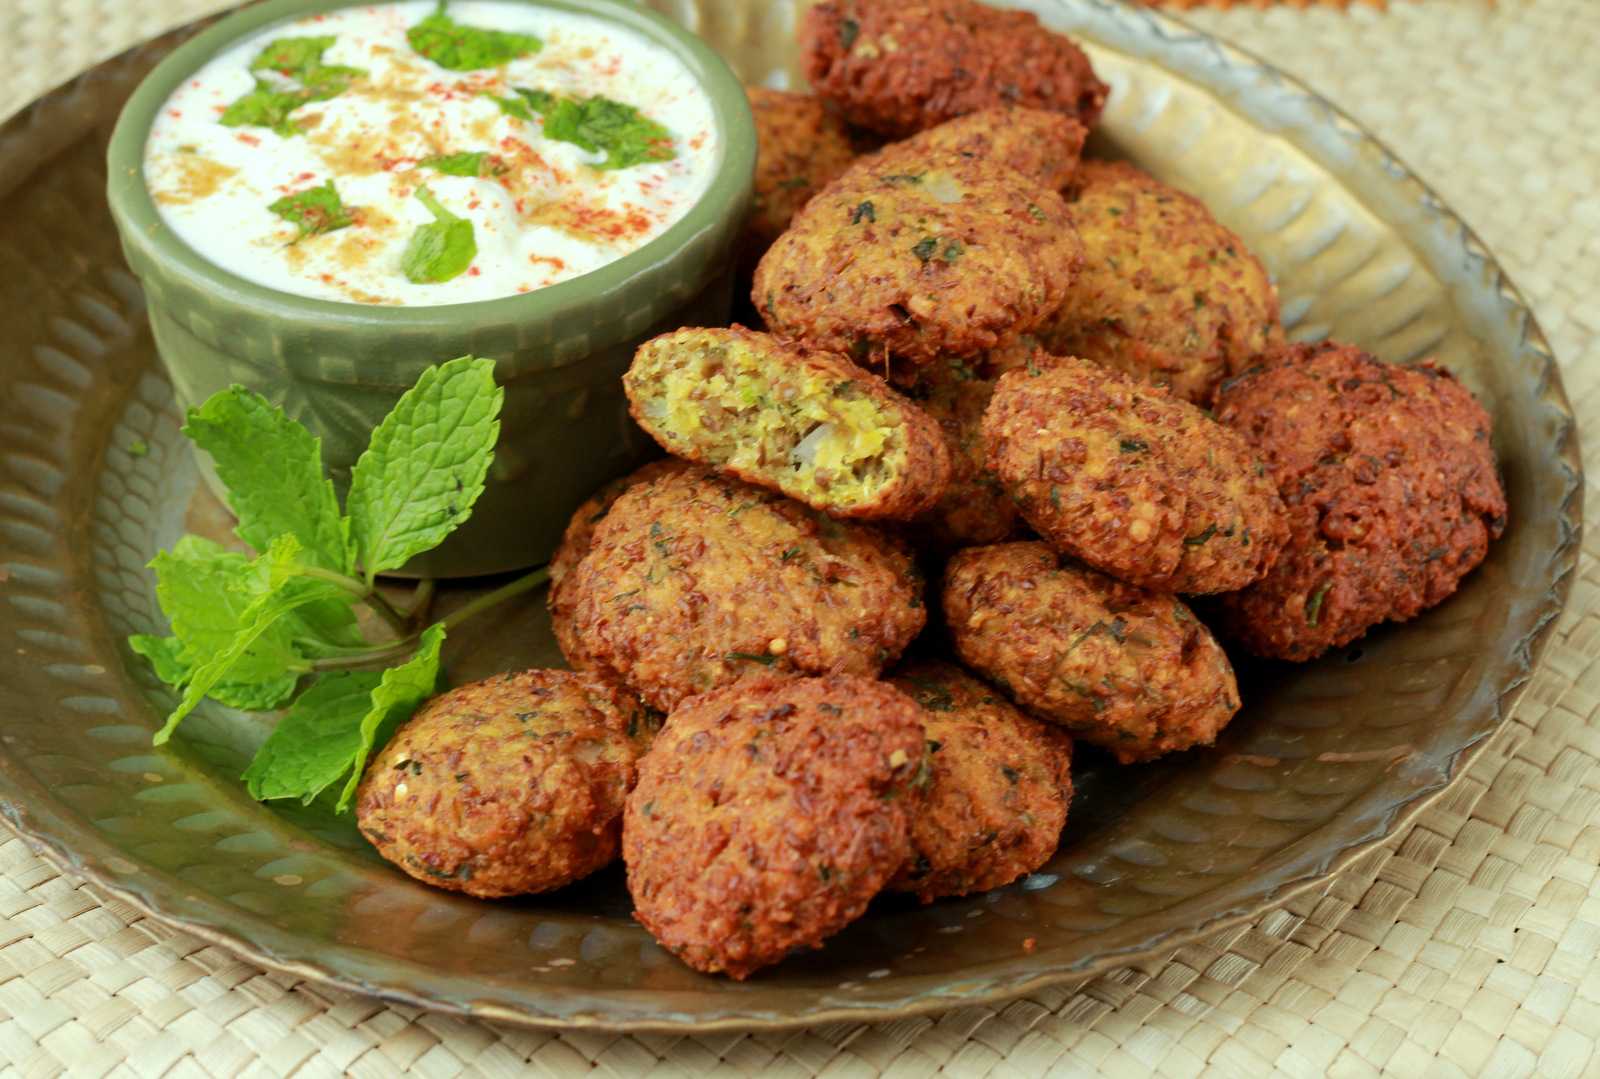 Matkiche Vade Recipe - Moth Beans Fritters 